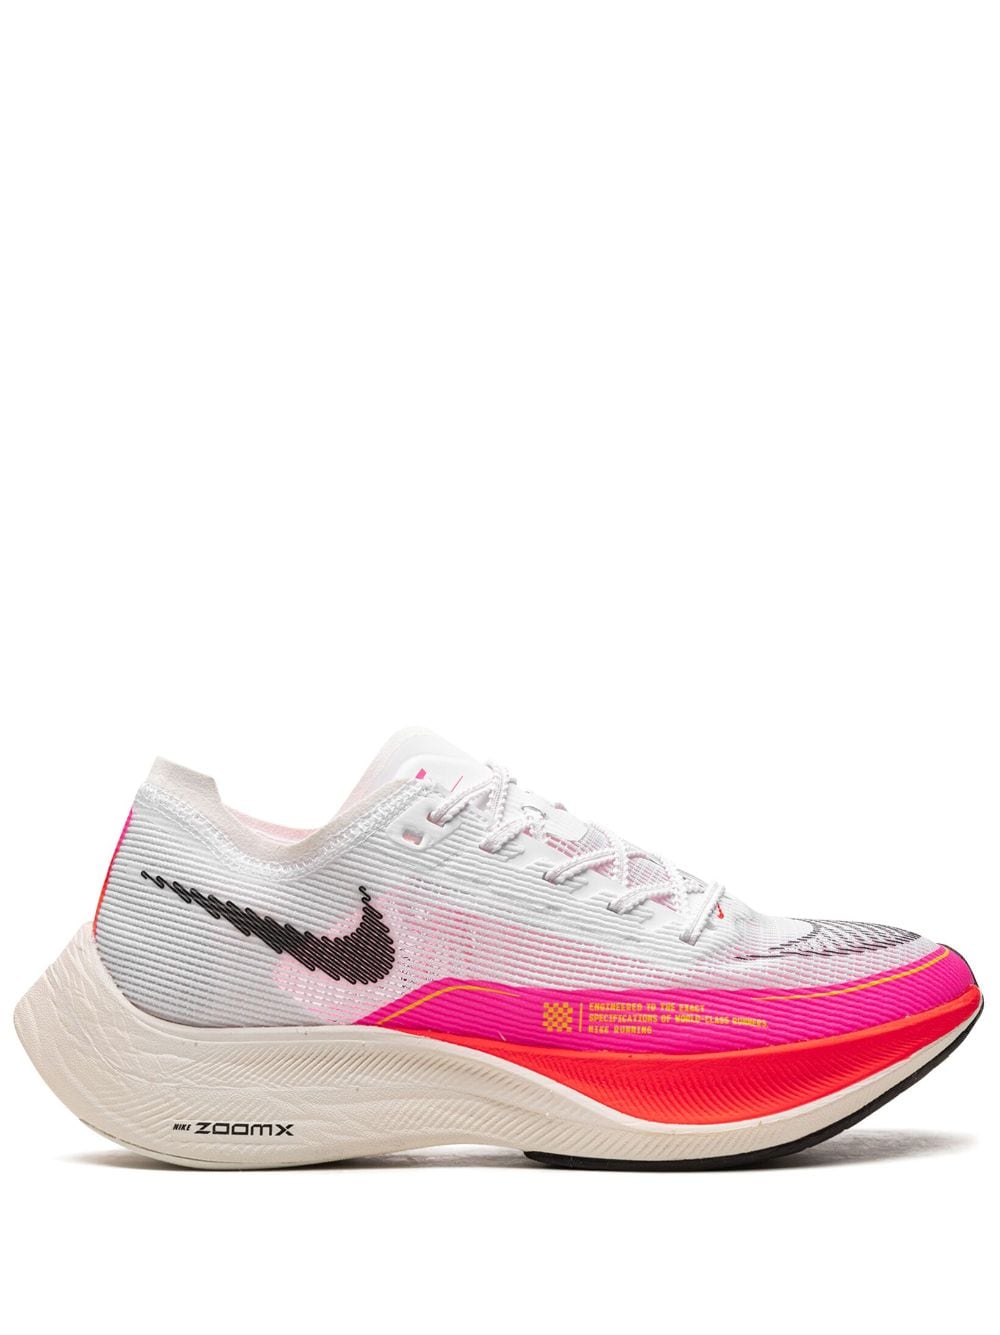 Nike ZoomX Vaporfly Next % 2 sneakers - Pink von Nike